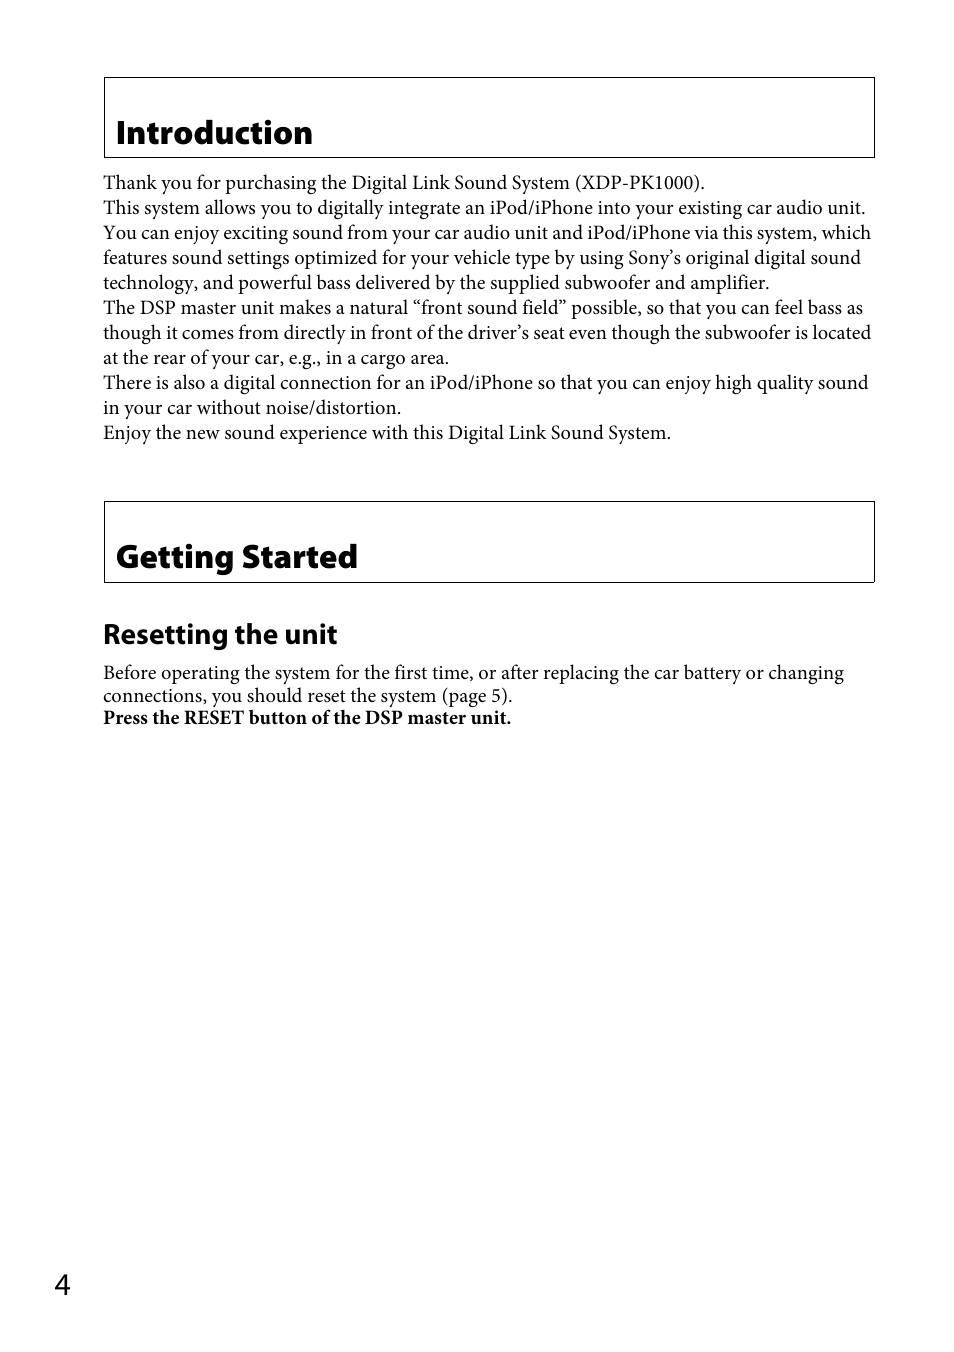 Introduction, Getting started, Resetting the unit | Sony XDP-PK1000 User Manual | Page 4 / 52